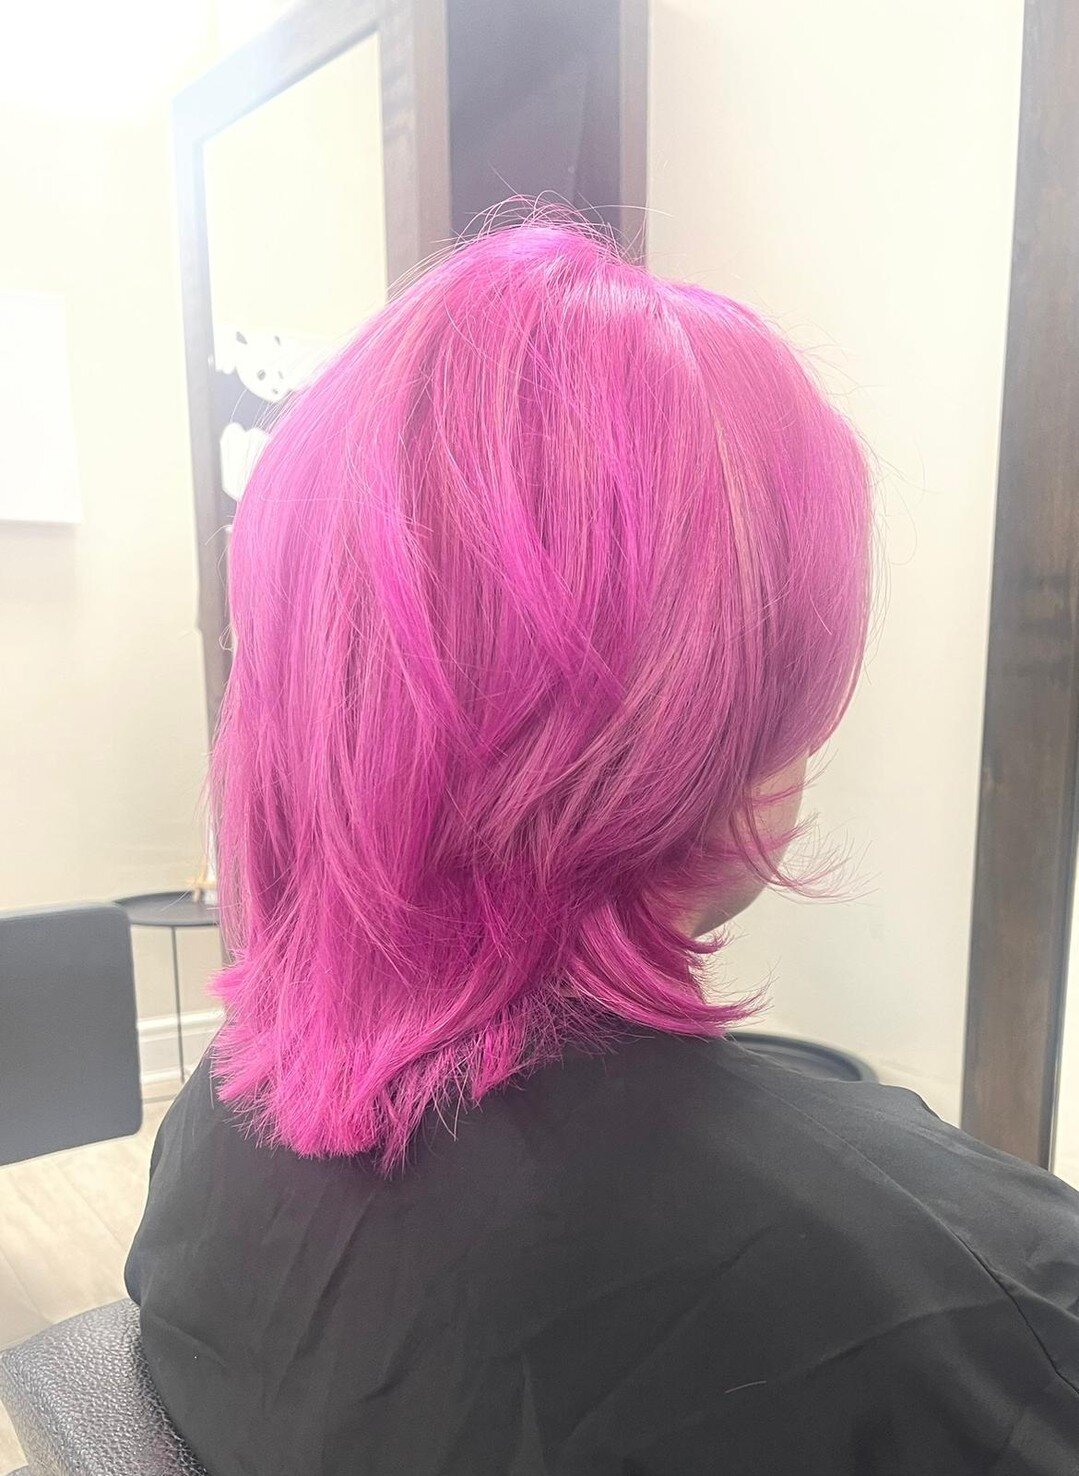 💗 P I N K 💗

We love bold, creative looks like this 😍

Pink transformation by the fabulous Tom 🙌

#dothairliverpool #lorealpro #lorealpro #iamahairartist #iamahairartistwin #frenchbalayage #frenchglossing #liverpoolsalon #liverpoolhair #liverpool